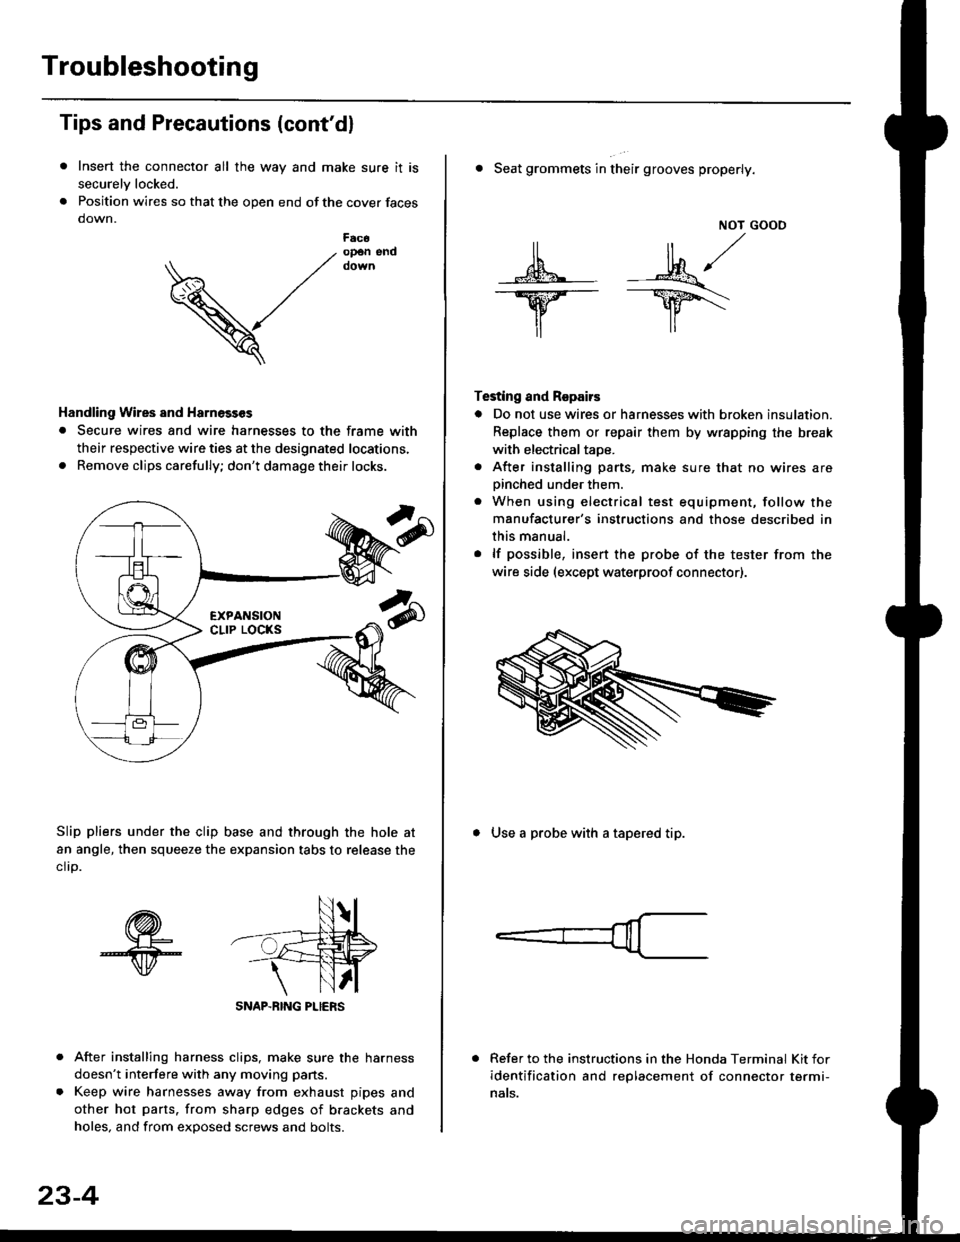 HONDA CIVIC 1996 6.G Workshop Manual Troubleshooting
Tips and Precautions (contdl
Insert the connector all the way and make sure it is
securelv locked.
Position wires so that the open end of the cover faces
down.
After installing harnes